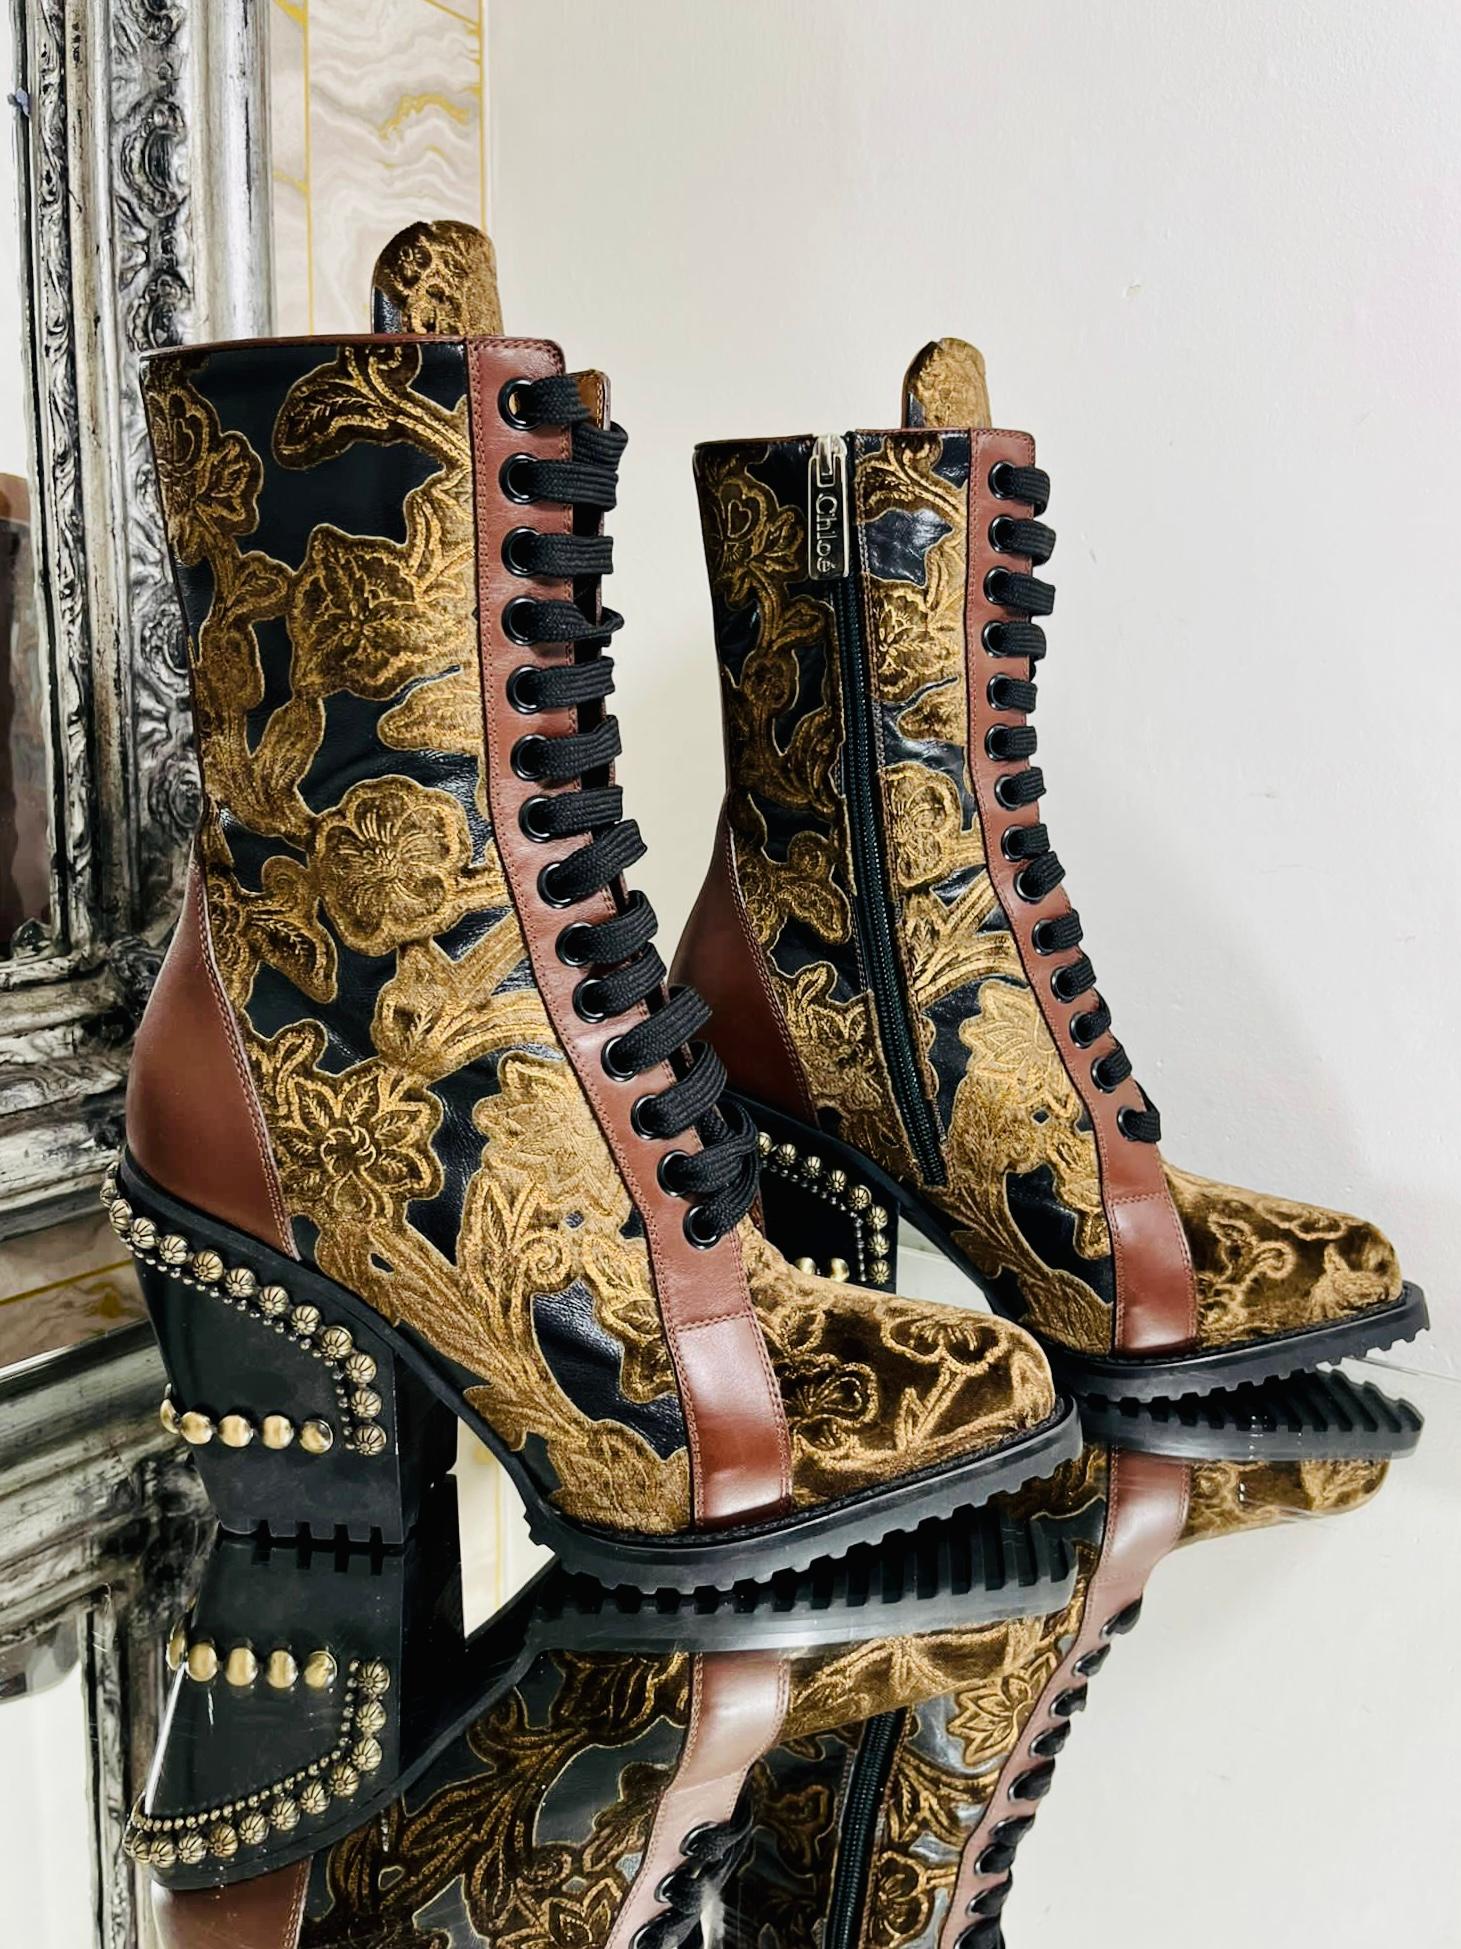 Women's Chloe Rylee Brocade & Stud Ankle Boots For Sale